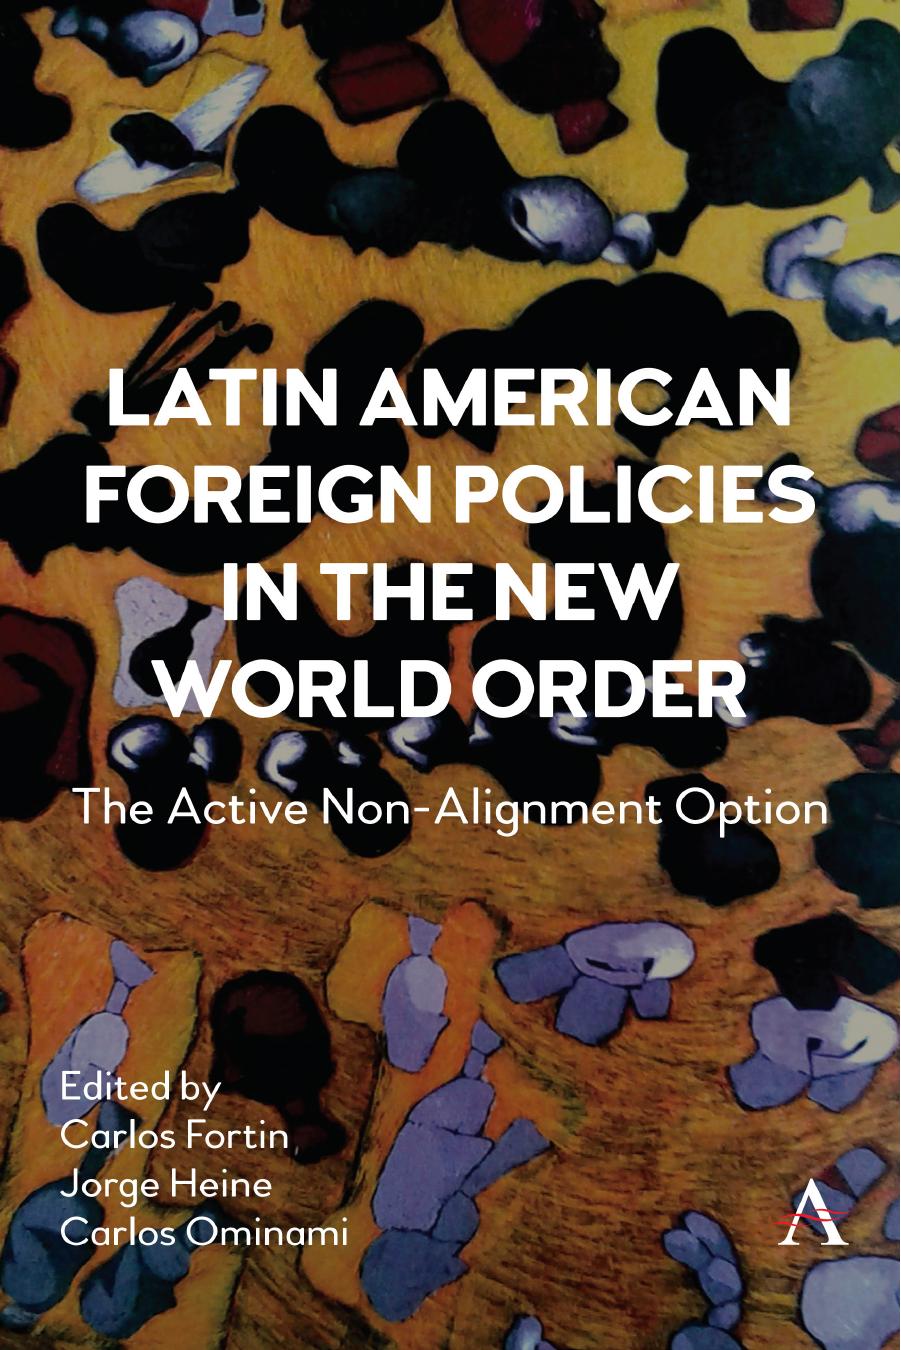 Latin American Foreign Policies in the New World Order: The Active Non-Alignment Option by Jorge Heine Carlos Fortin Carlos Ominami